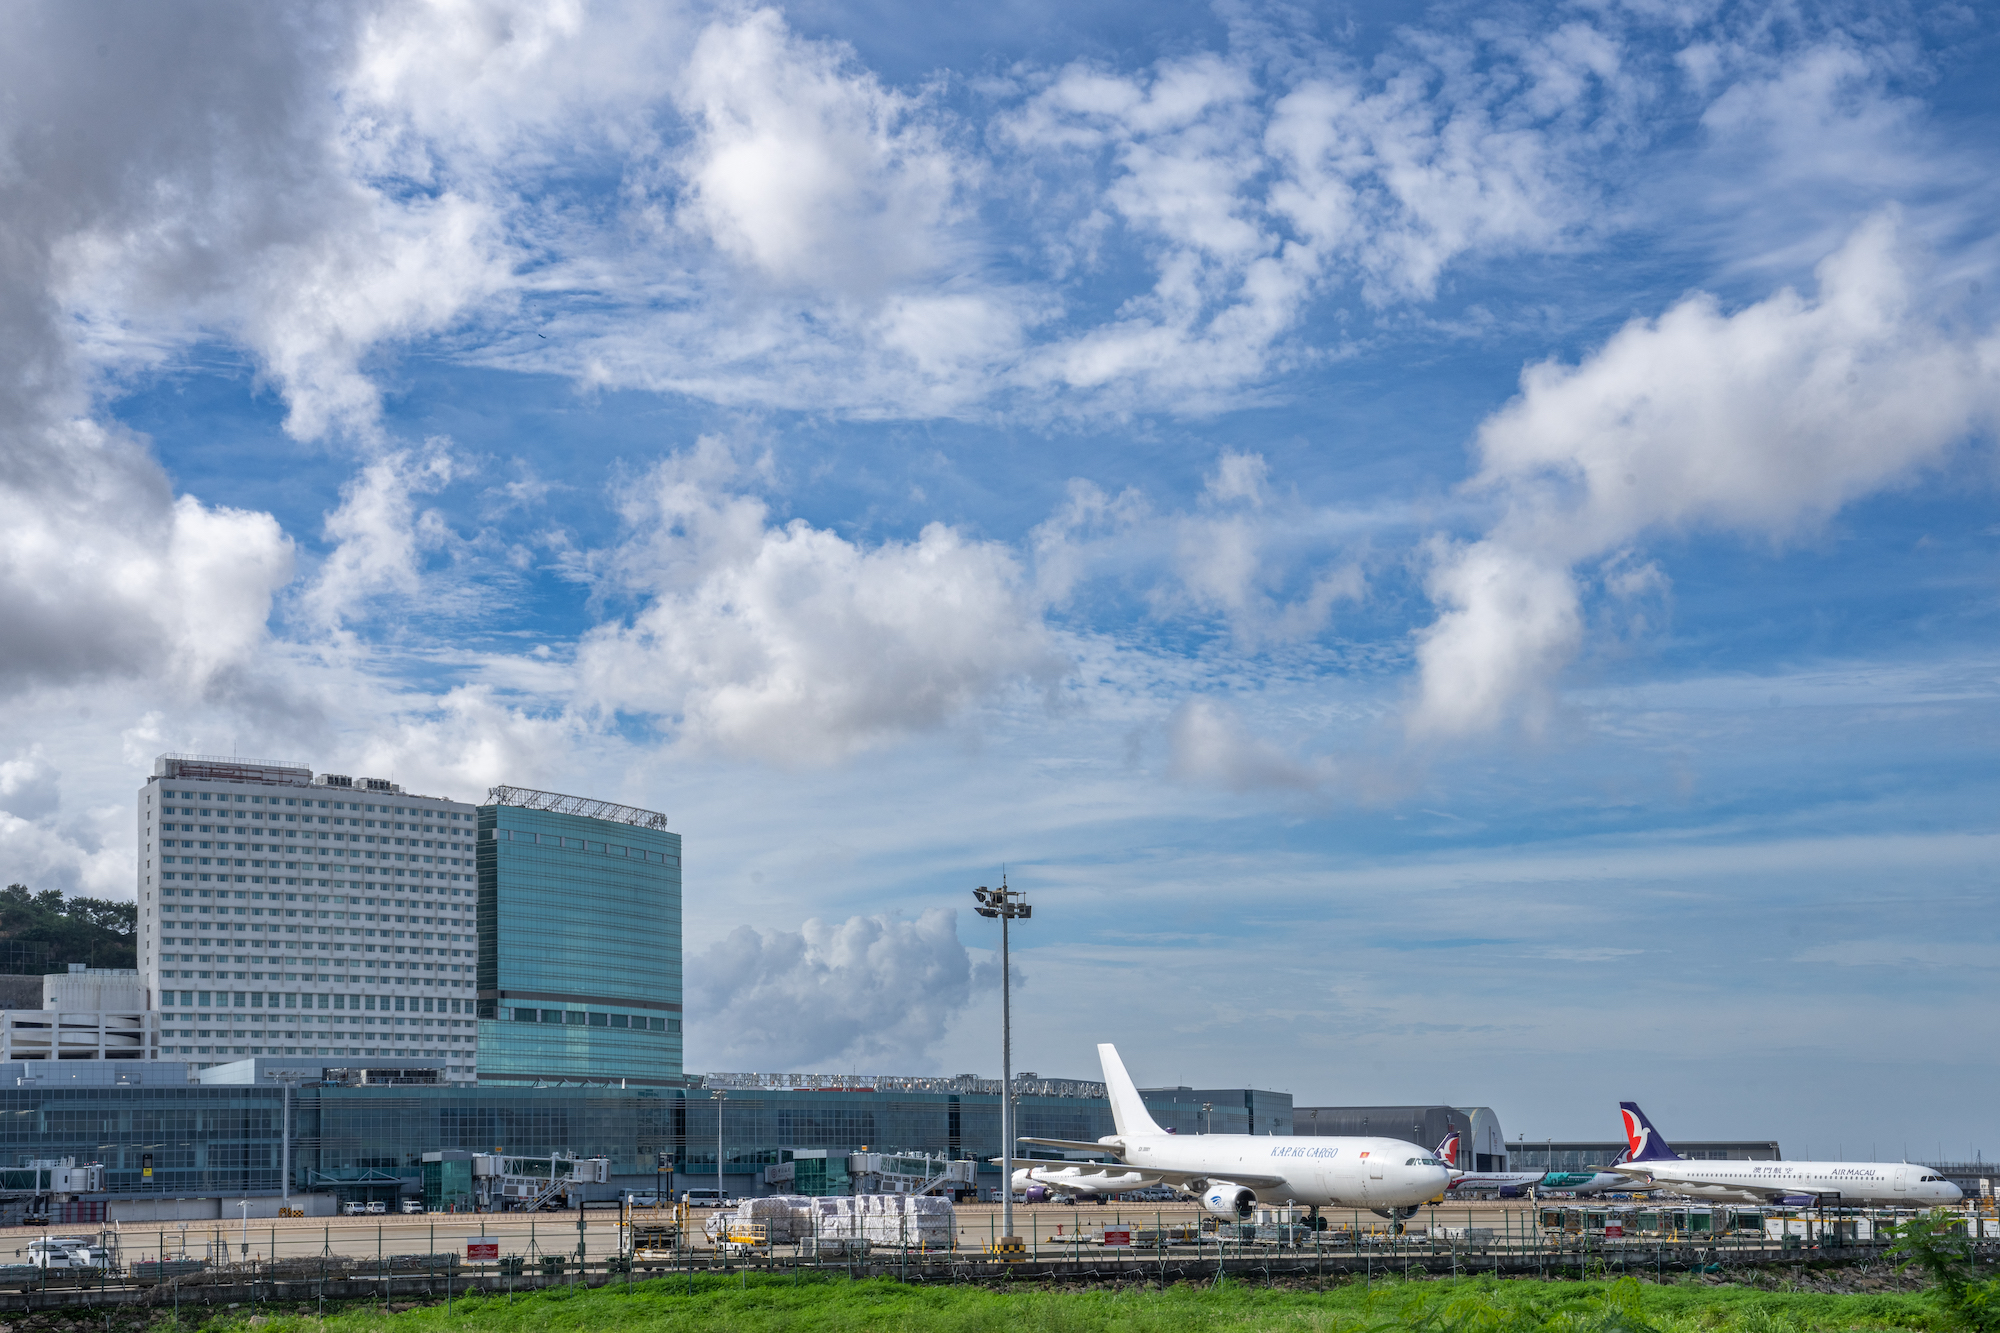 Macao’s airport saw just two-thirds of its pre-pandemic passenger volume during golden week